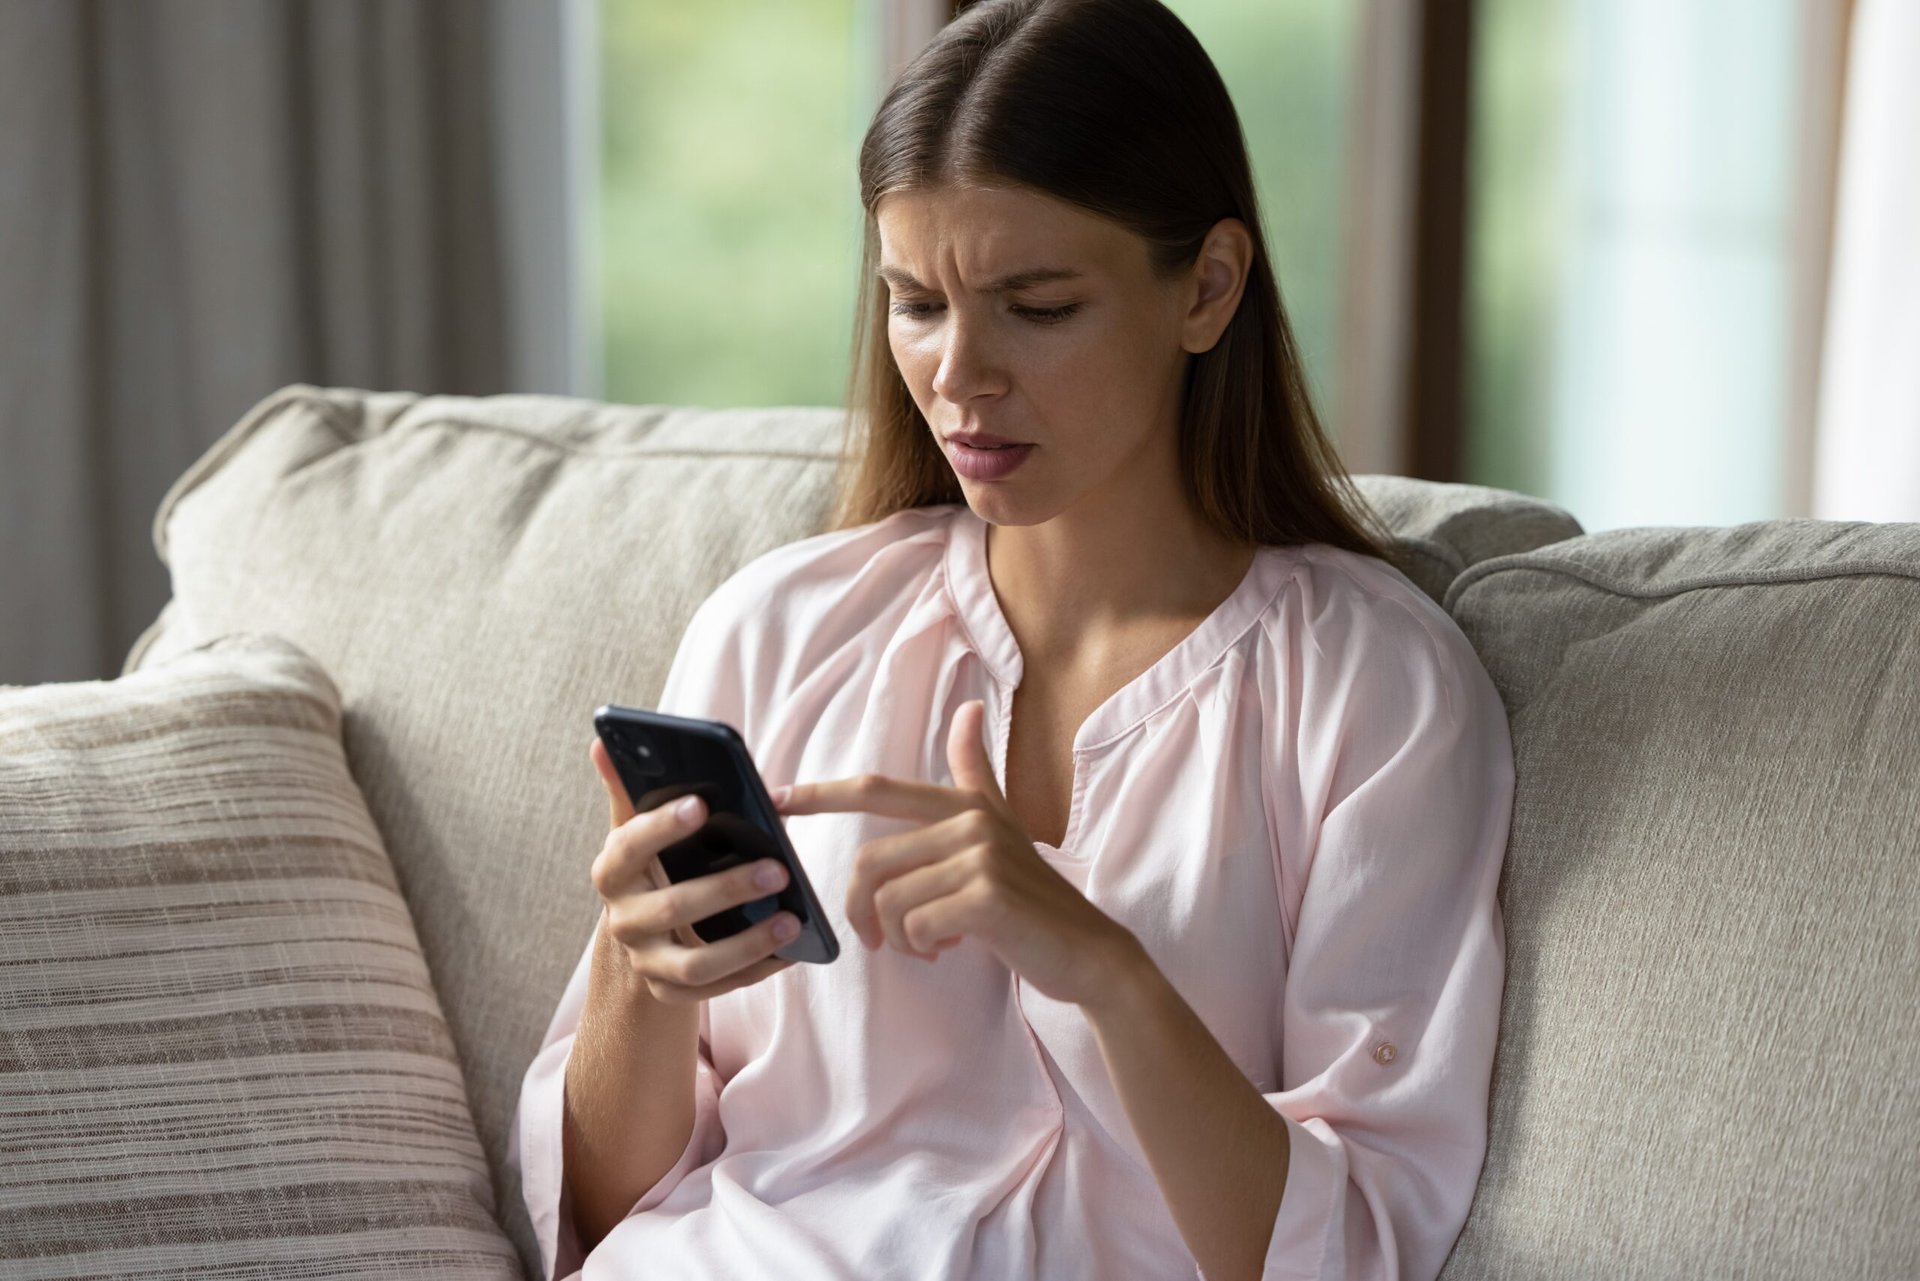 Woman on couch looking at her cell phone confused.